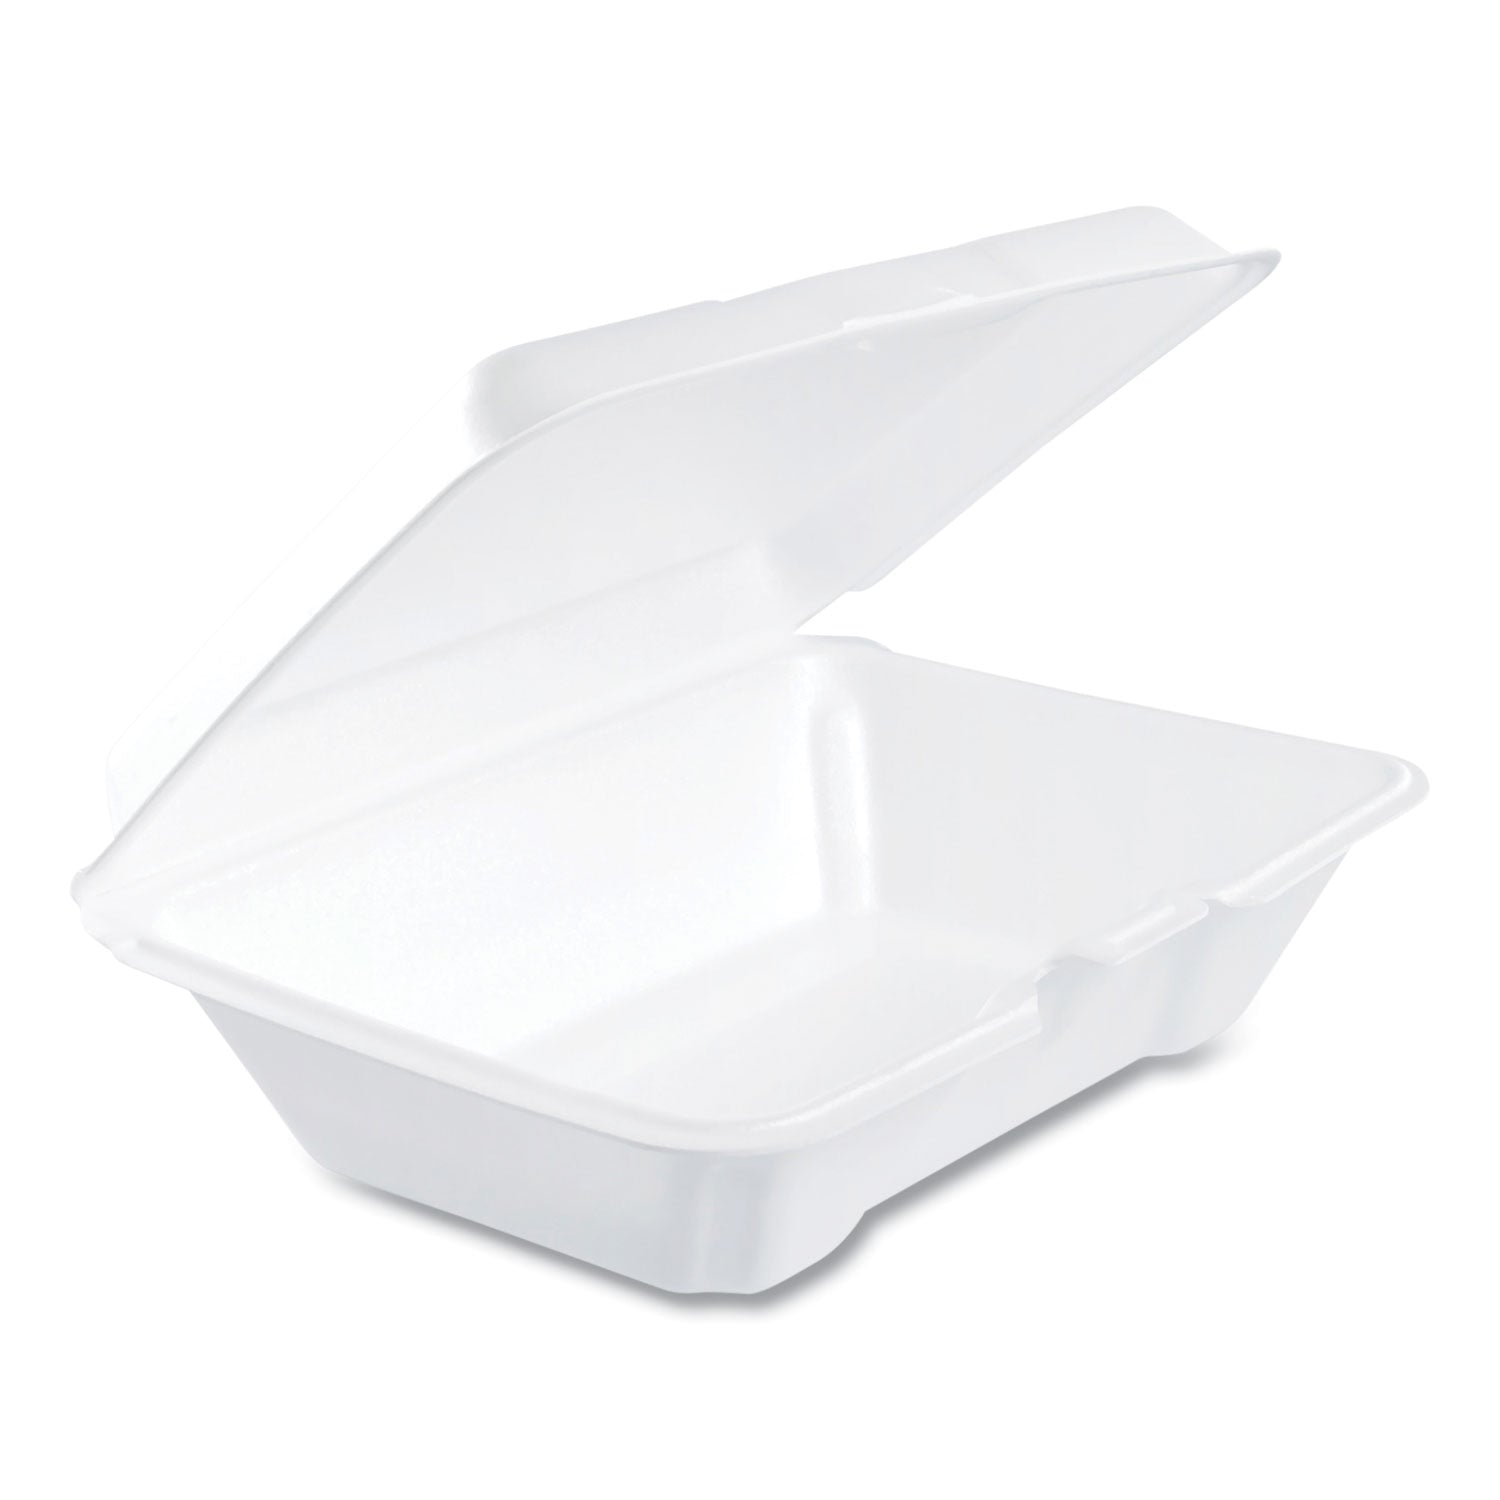 DART Foam Hinged Lid Containers, 1-Compartment, 6.4 x 9.3 x 2.9, White, 100/Pack, 2 Packs/Carton - Flipcost